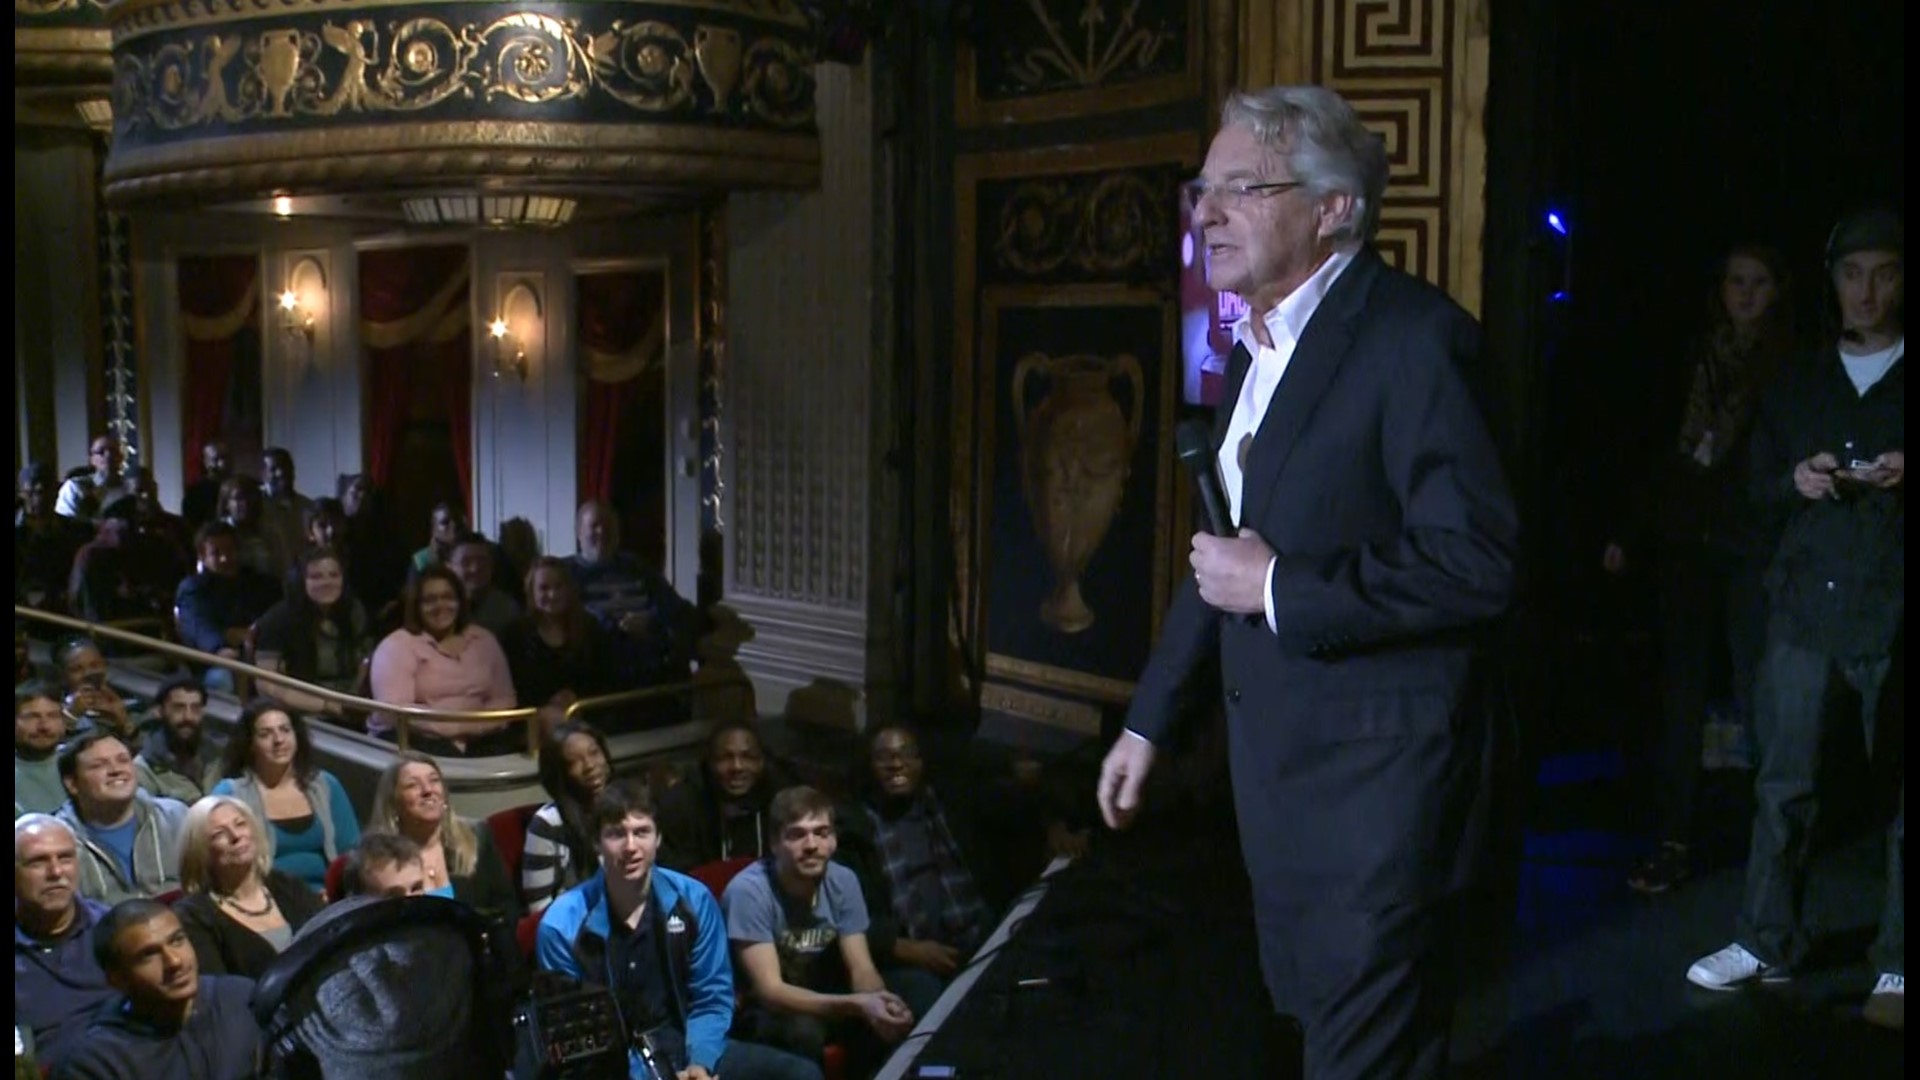 Take a look back at Jerry Springer's visit to the Palace Theatre in Waterbury.